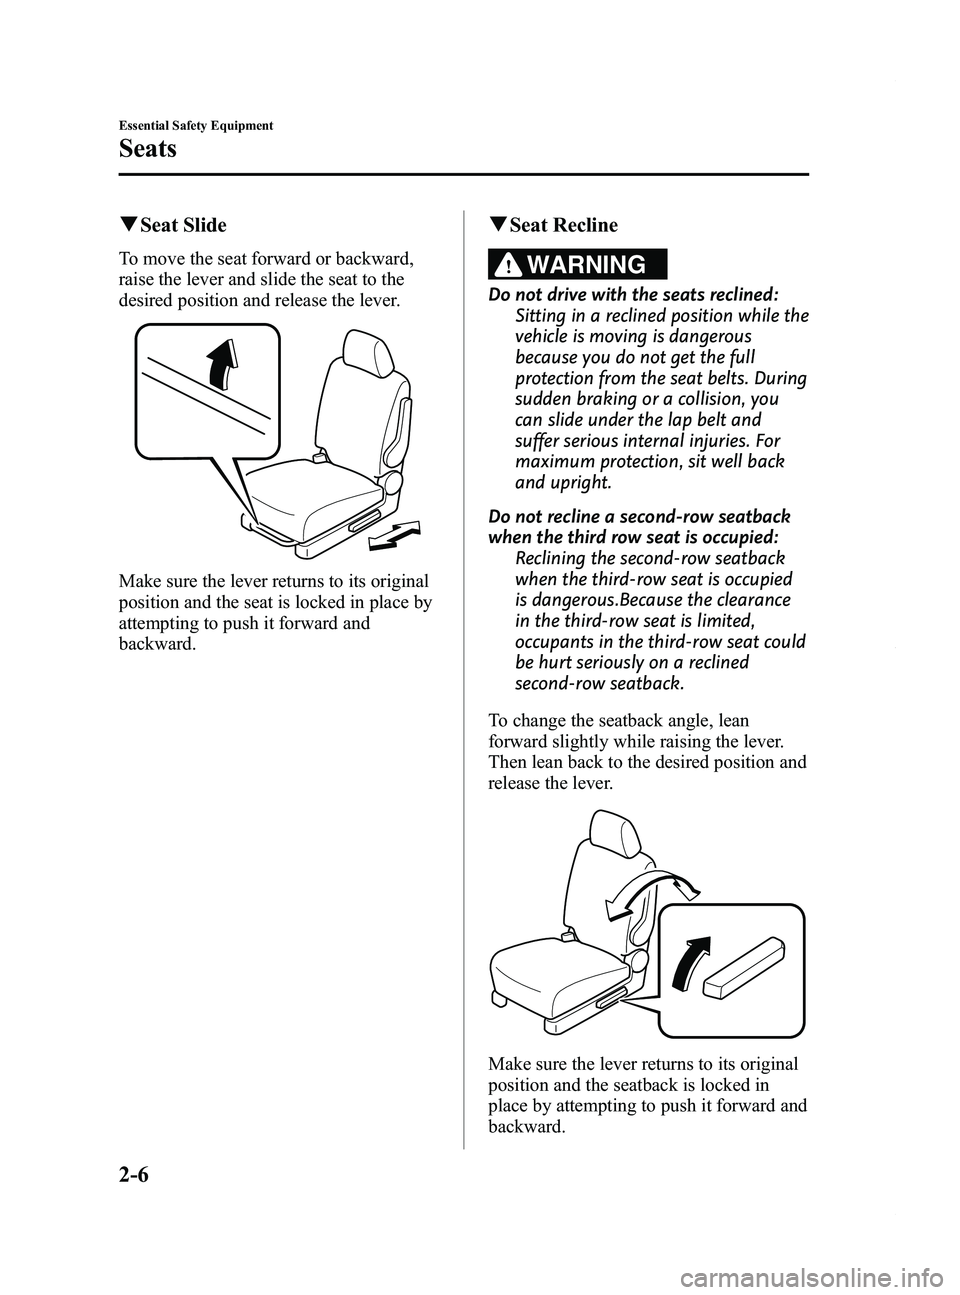 MAZDA MODEL 5 2014  Owners Manual Black plate (18,1)
qSeat Slide
To move the seat forward or backward,
raise the lever and slide the seat to the
desired position and release the lever.
Make sure the lever returns to its original
posit